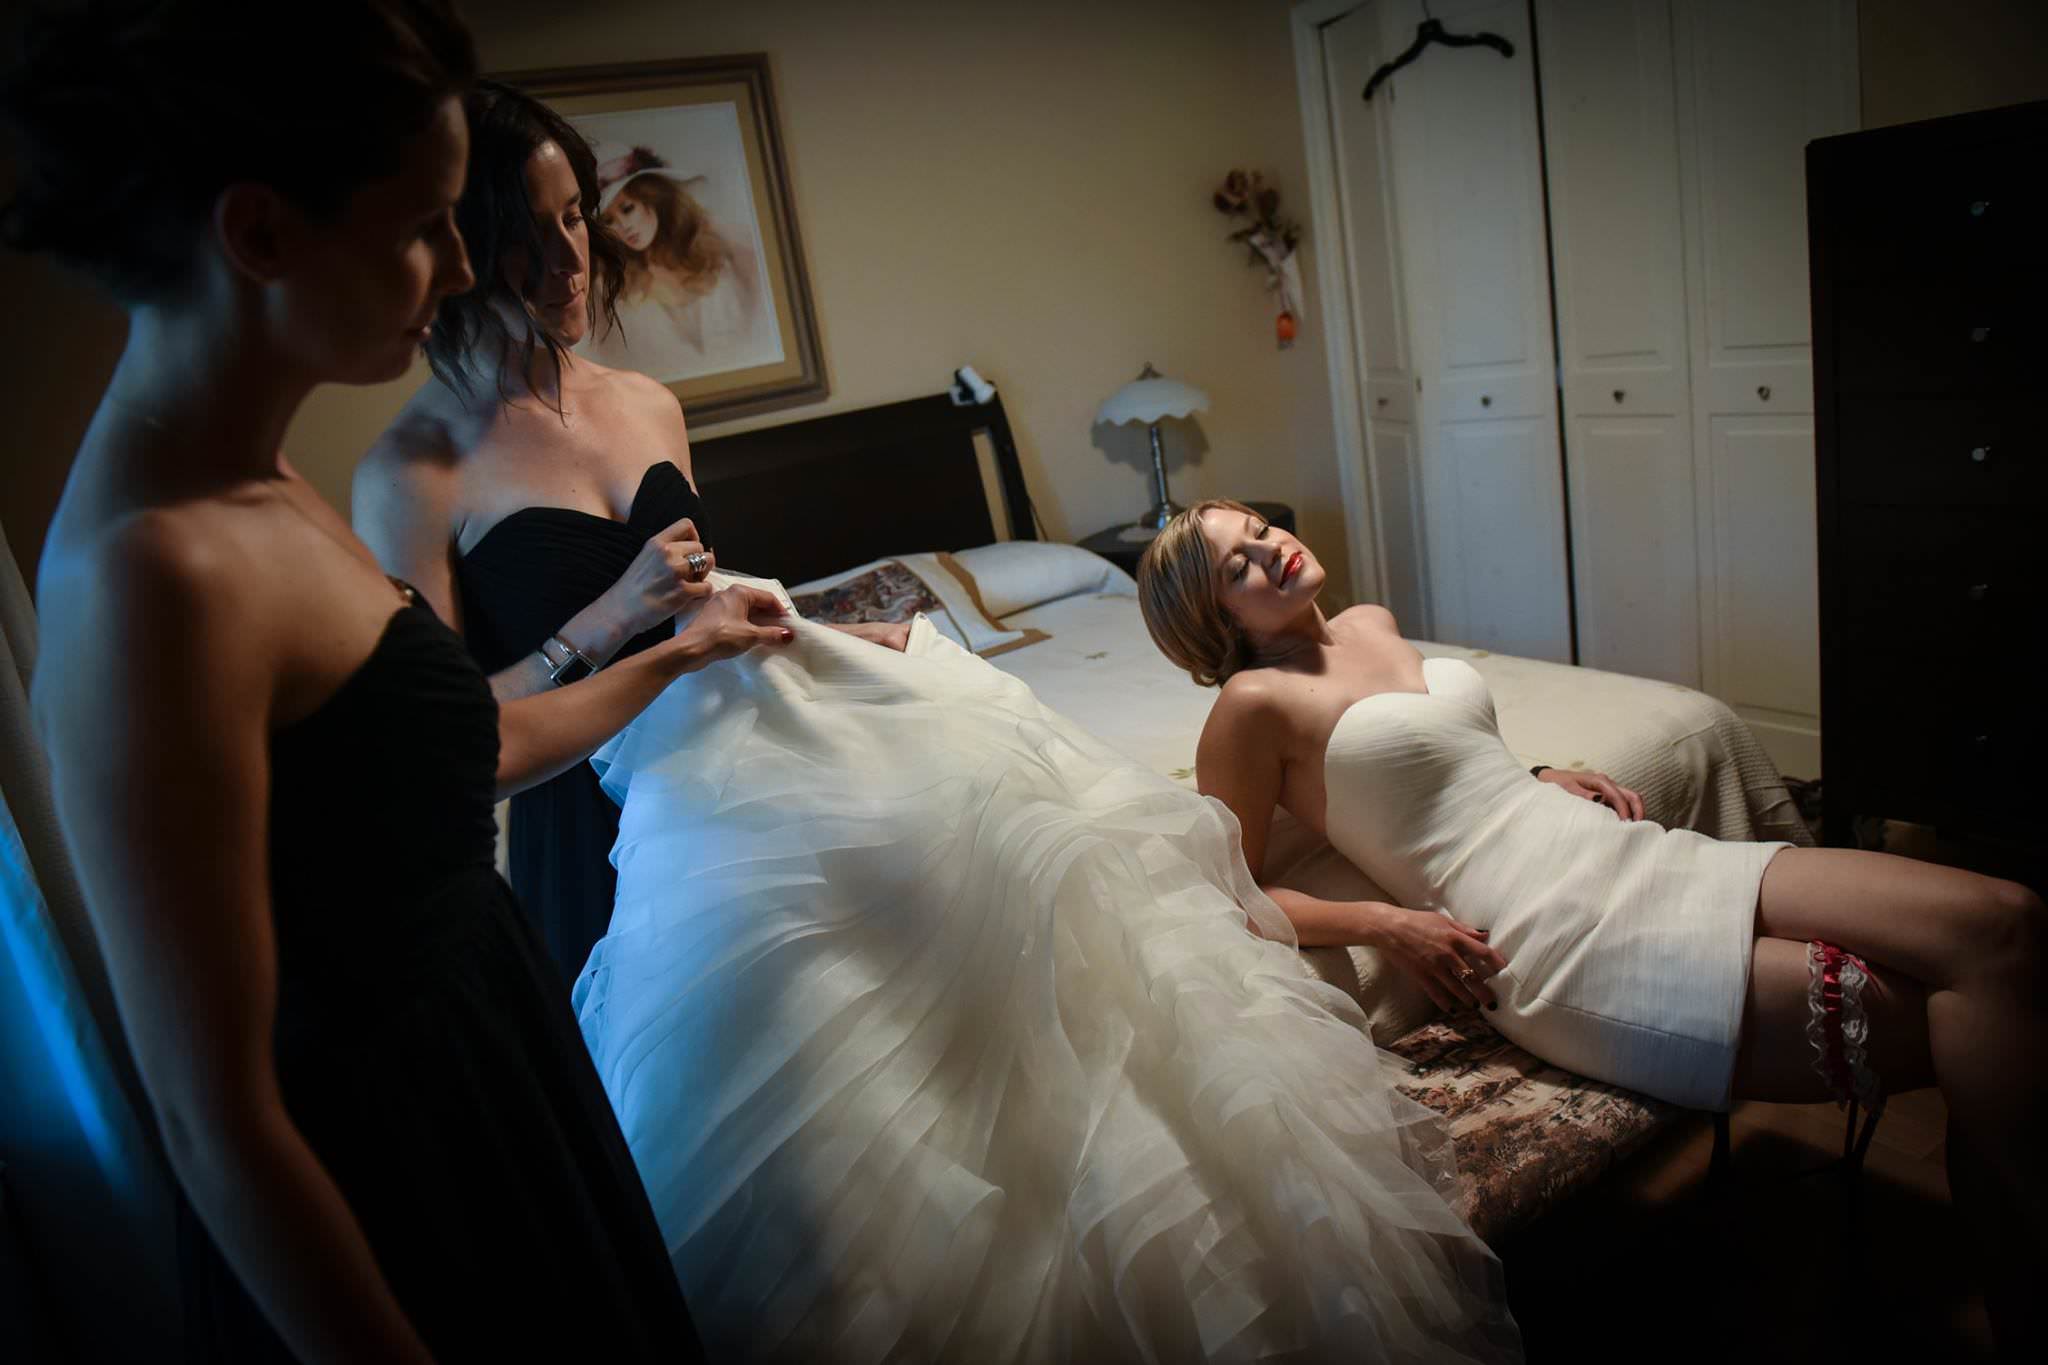 wedding trends for 2016 lavimage wedding photography best photographer montreal nyc vera varley